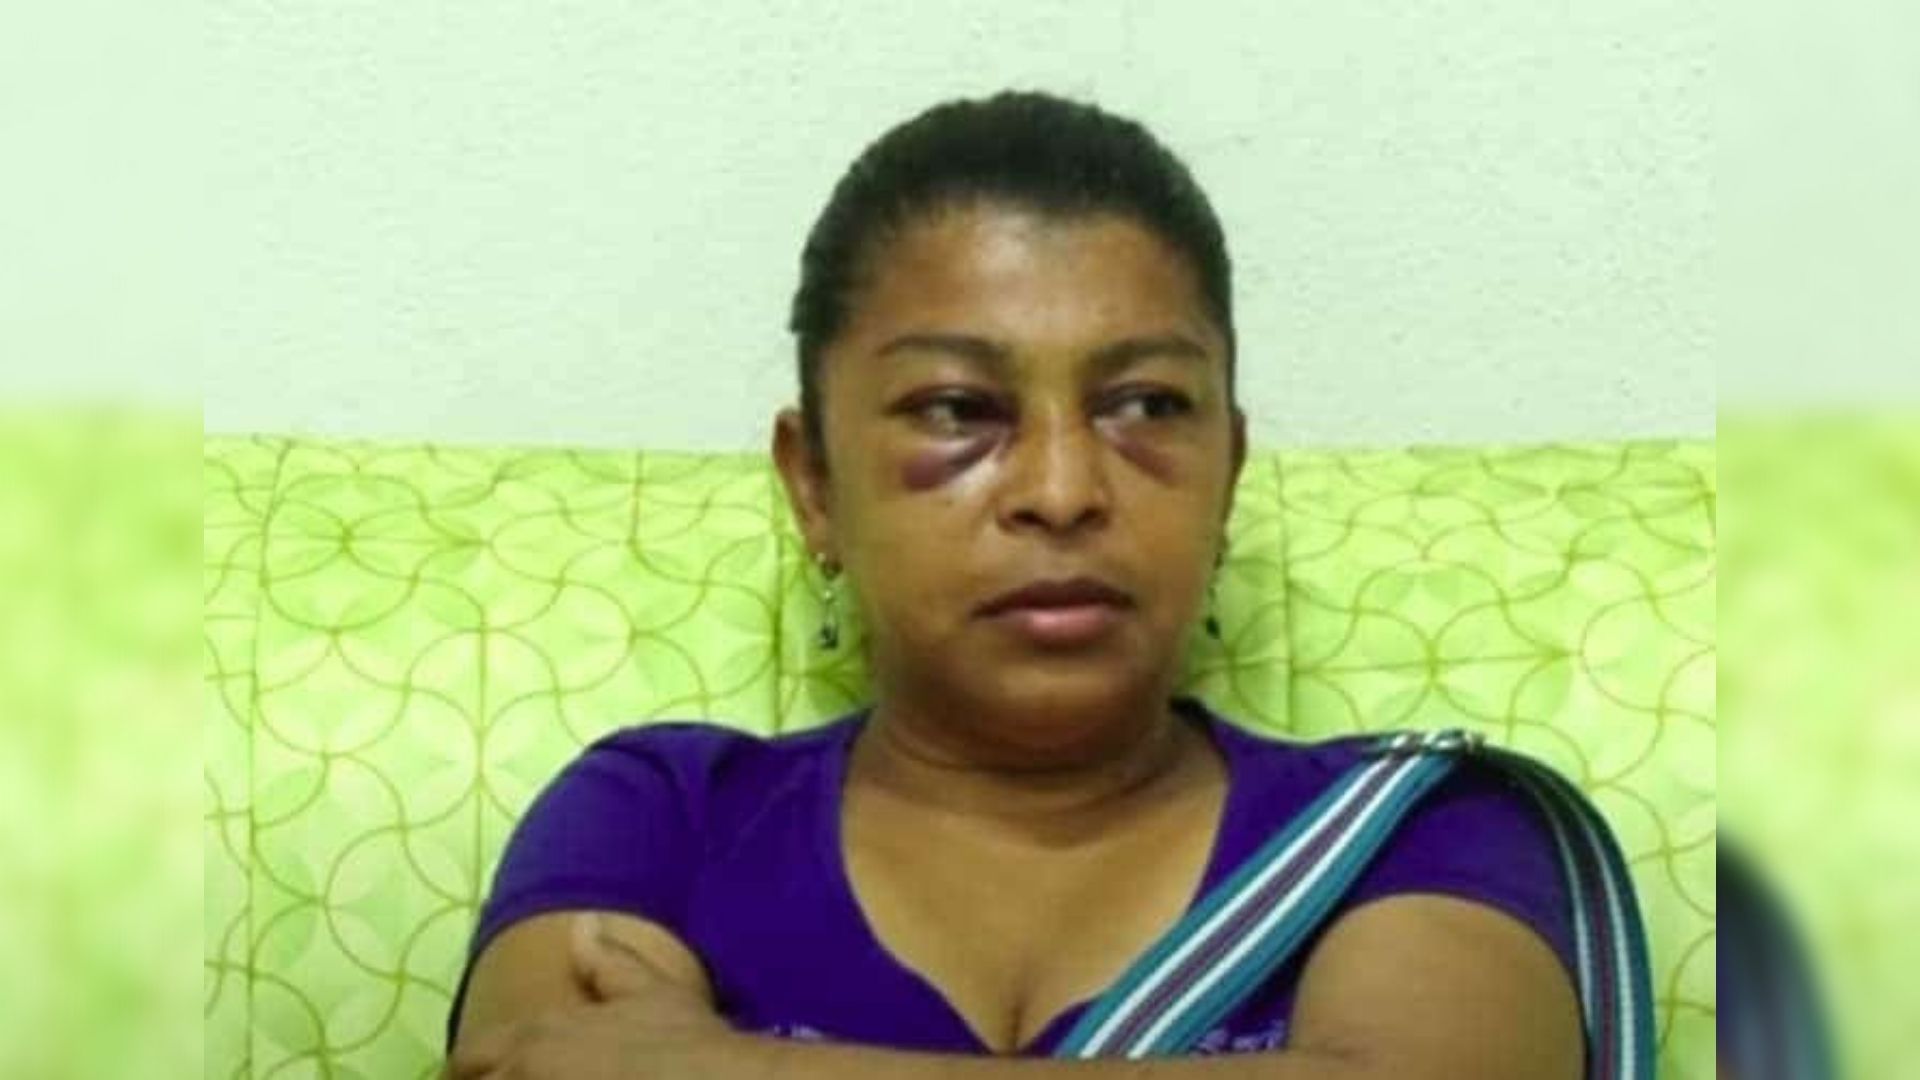 Justice of Ortega declares Martha Rivas guilty for denying that a Nandaime priest assaulted her